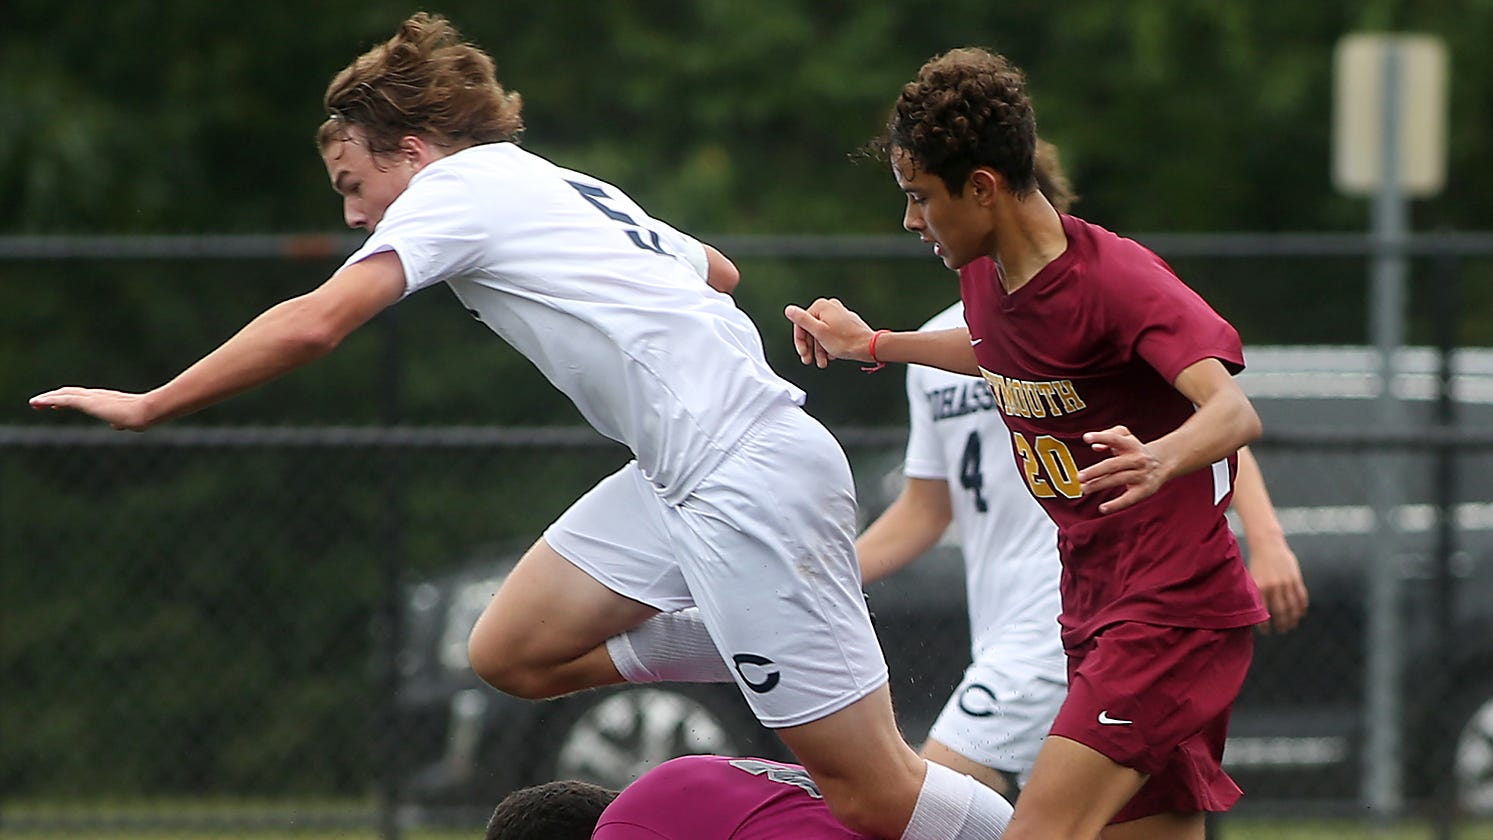 Cohasset High boys soccer team grabs South Shore League title by tying Rockland